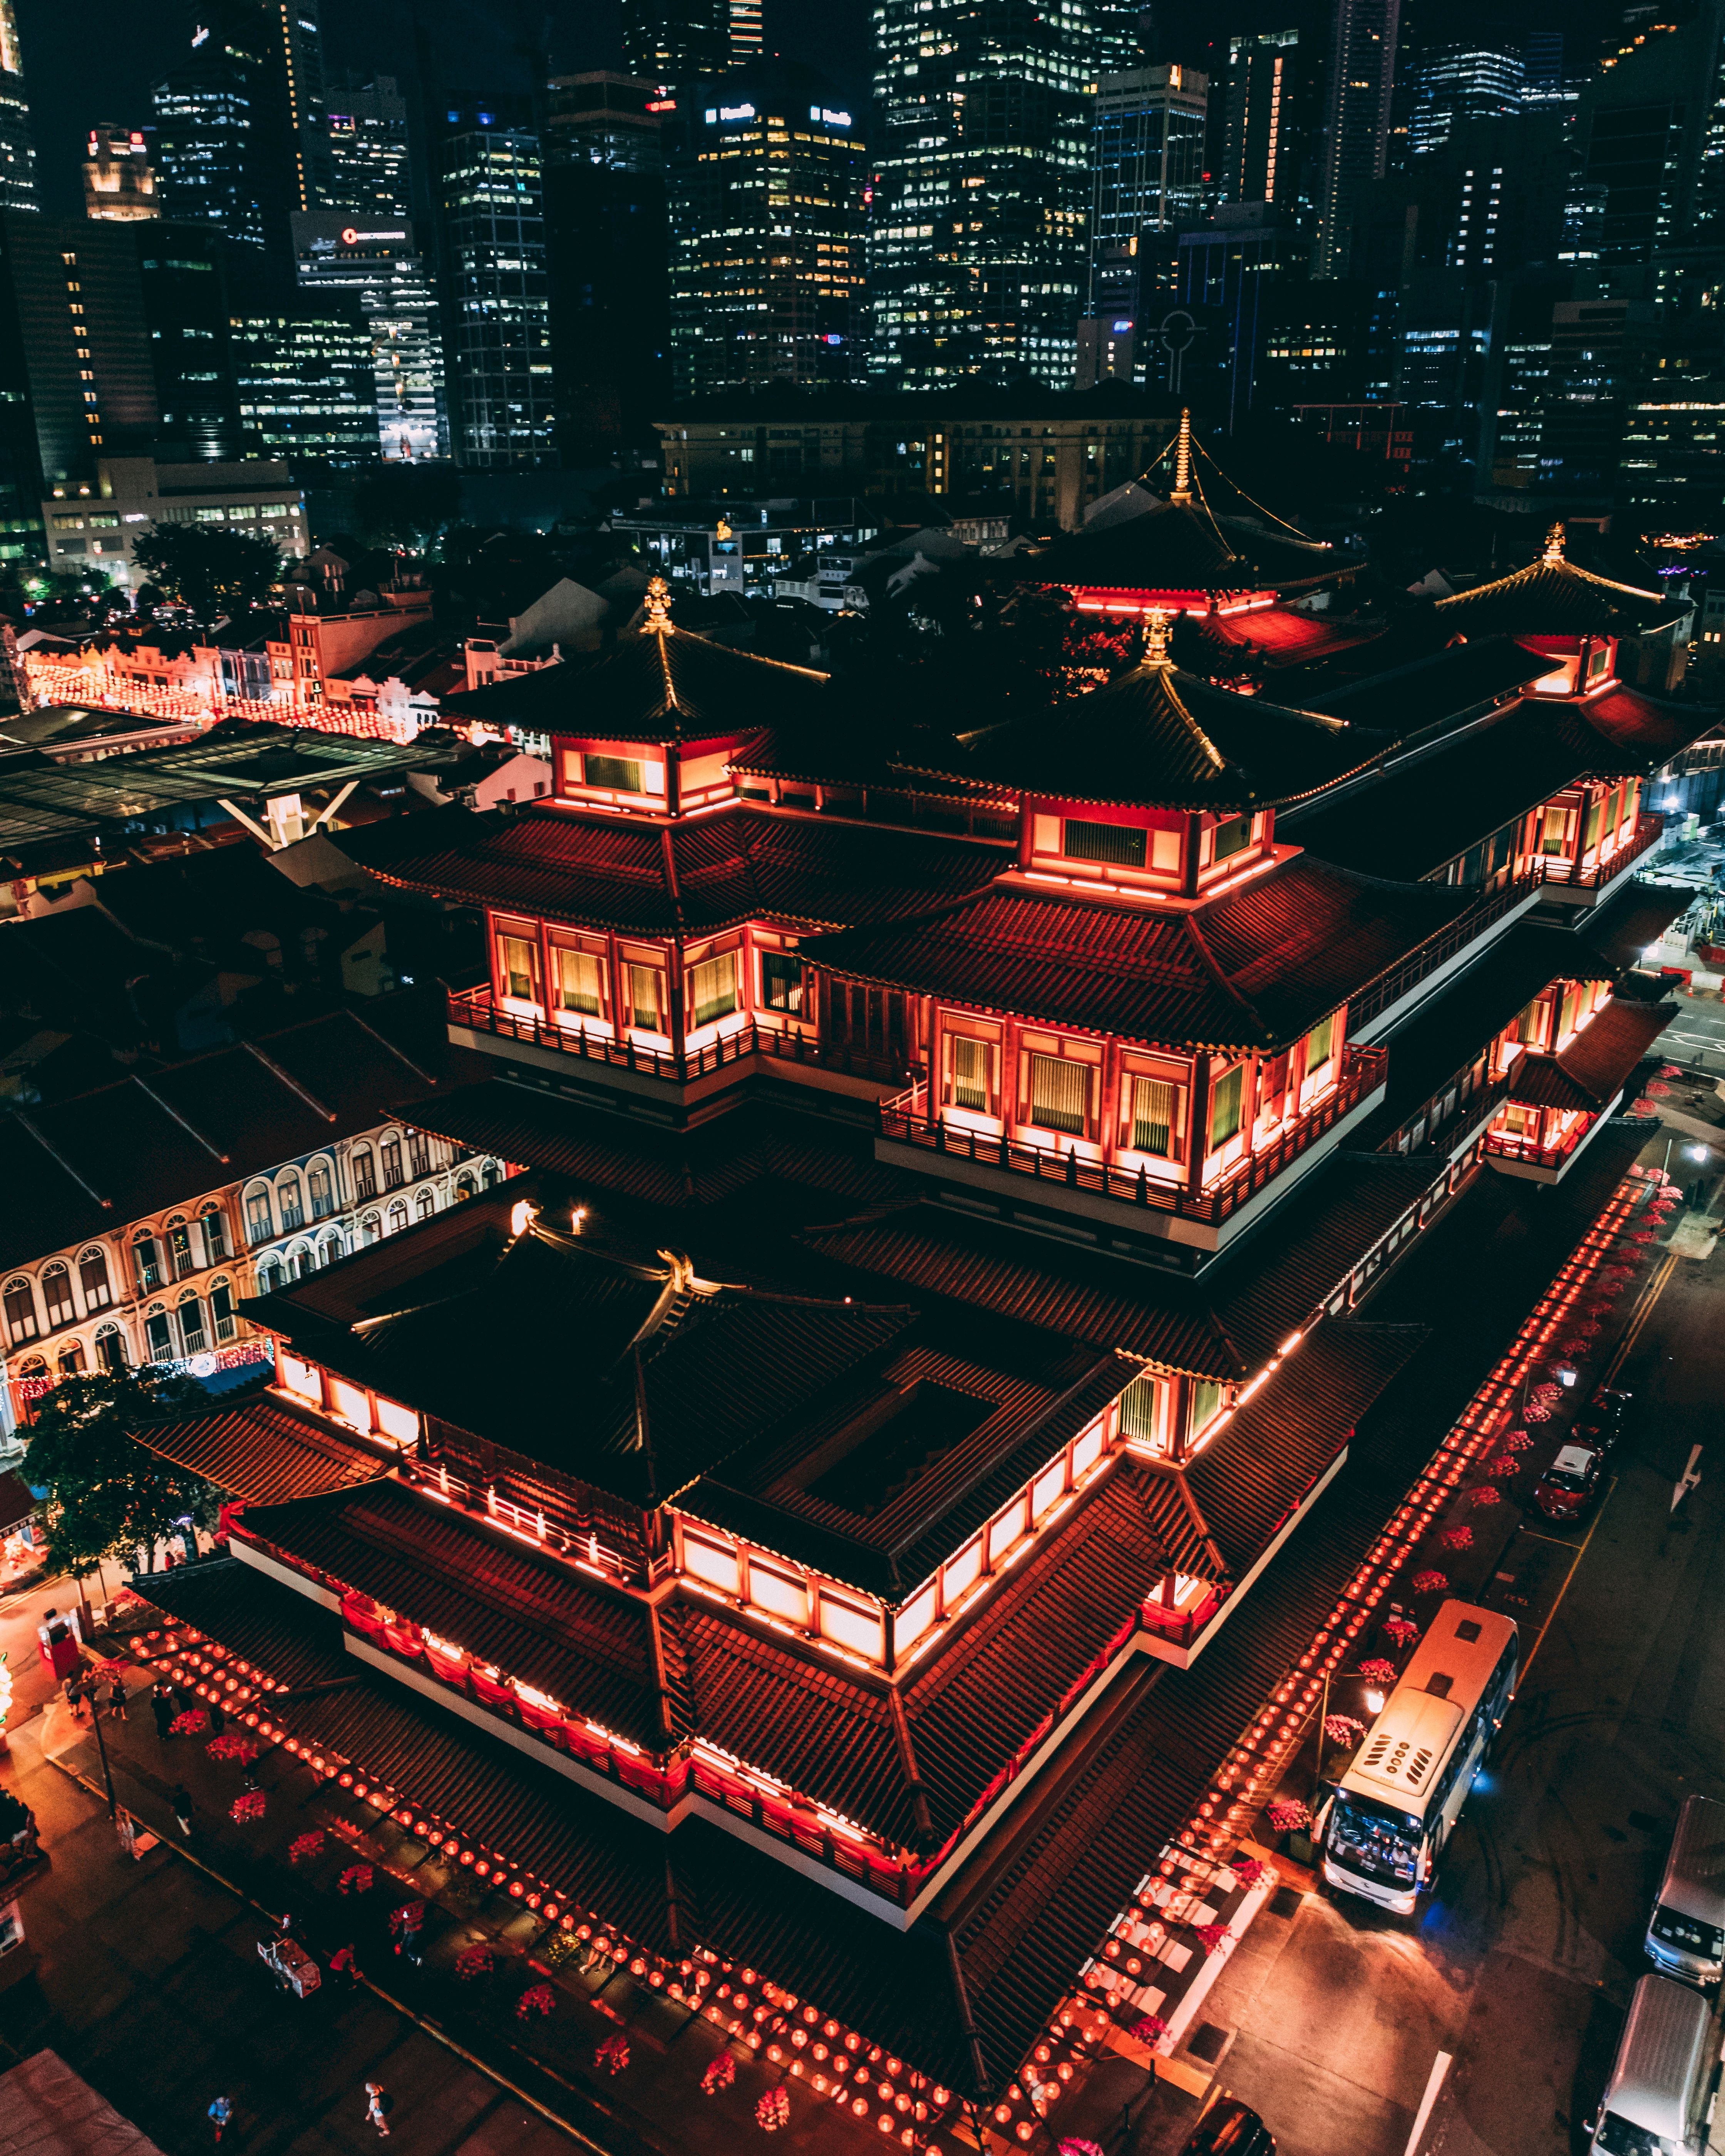 pagoda, cities, architecture, view from above, night city, roof, china, roofs 4K